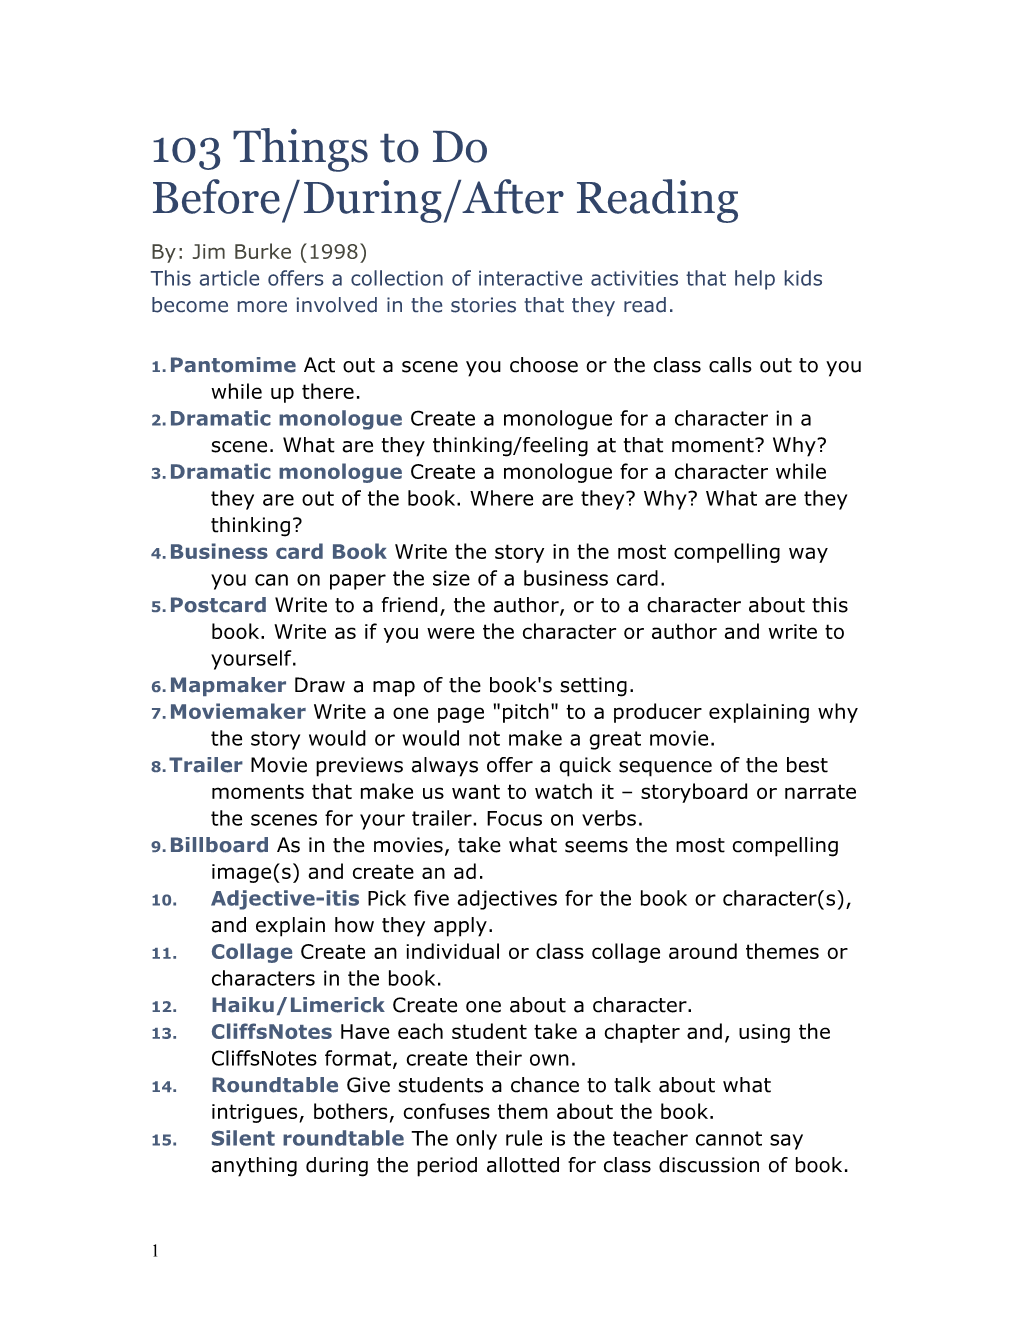 103 Things to Do Before/During/After Reading